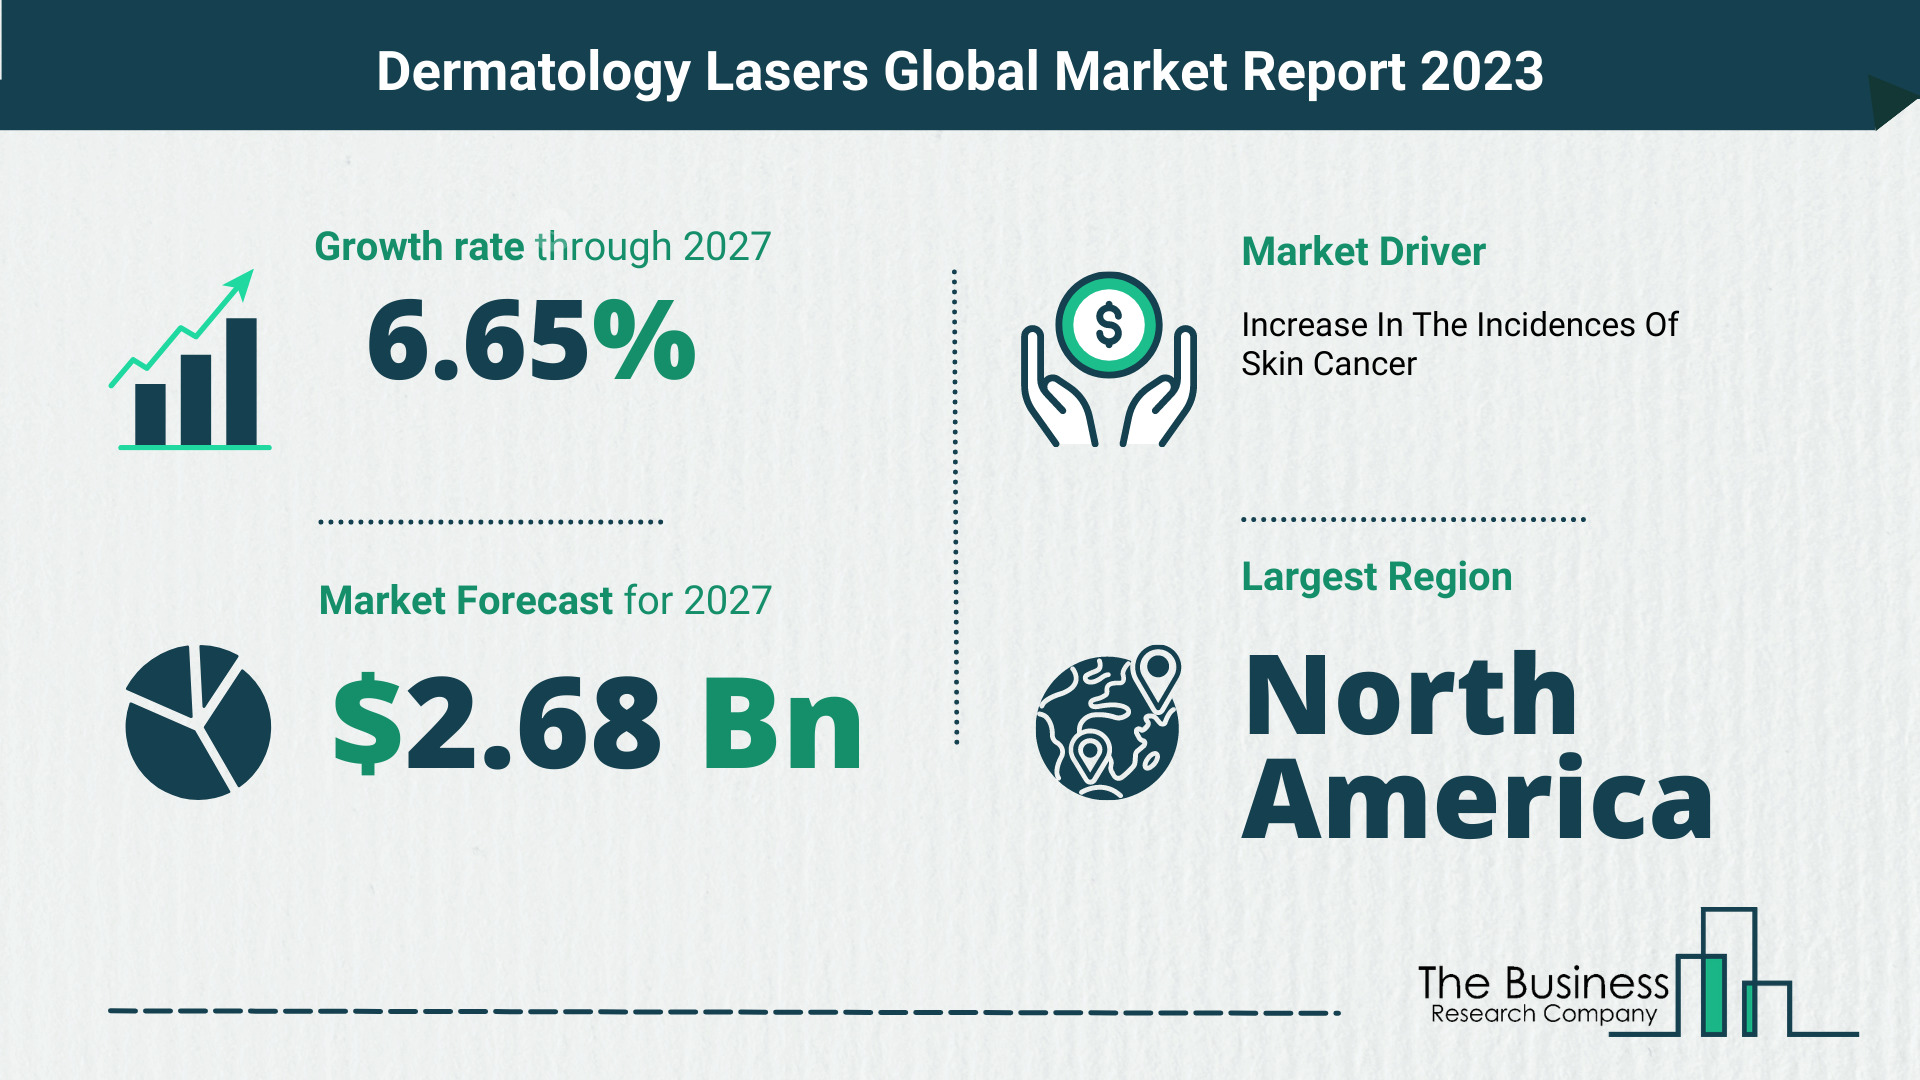 Dermatology Lasers Market Forecast 2023-2027 By The Business Research Company